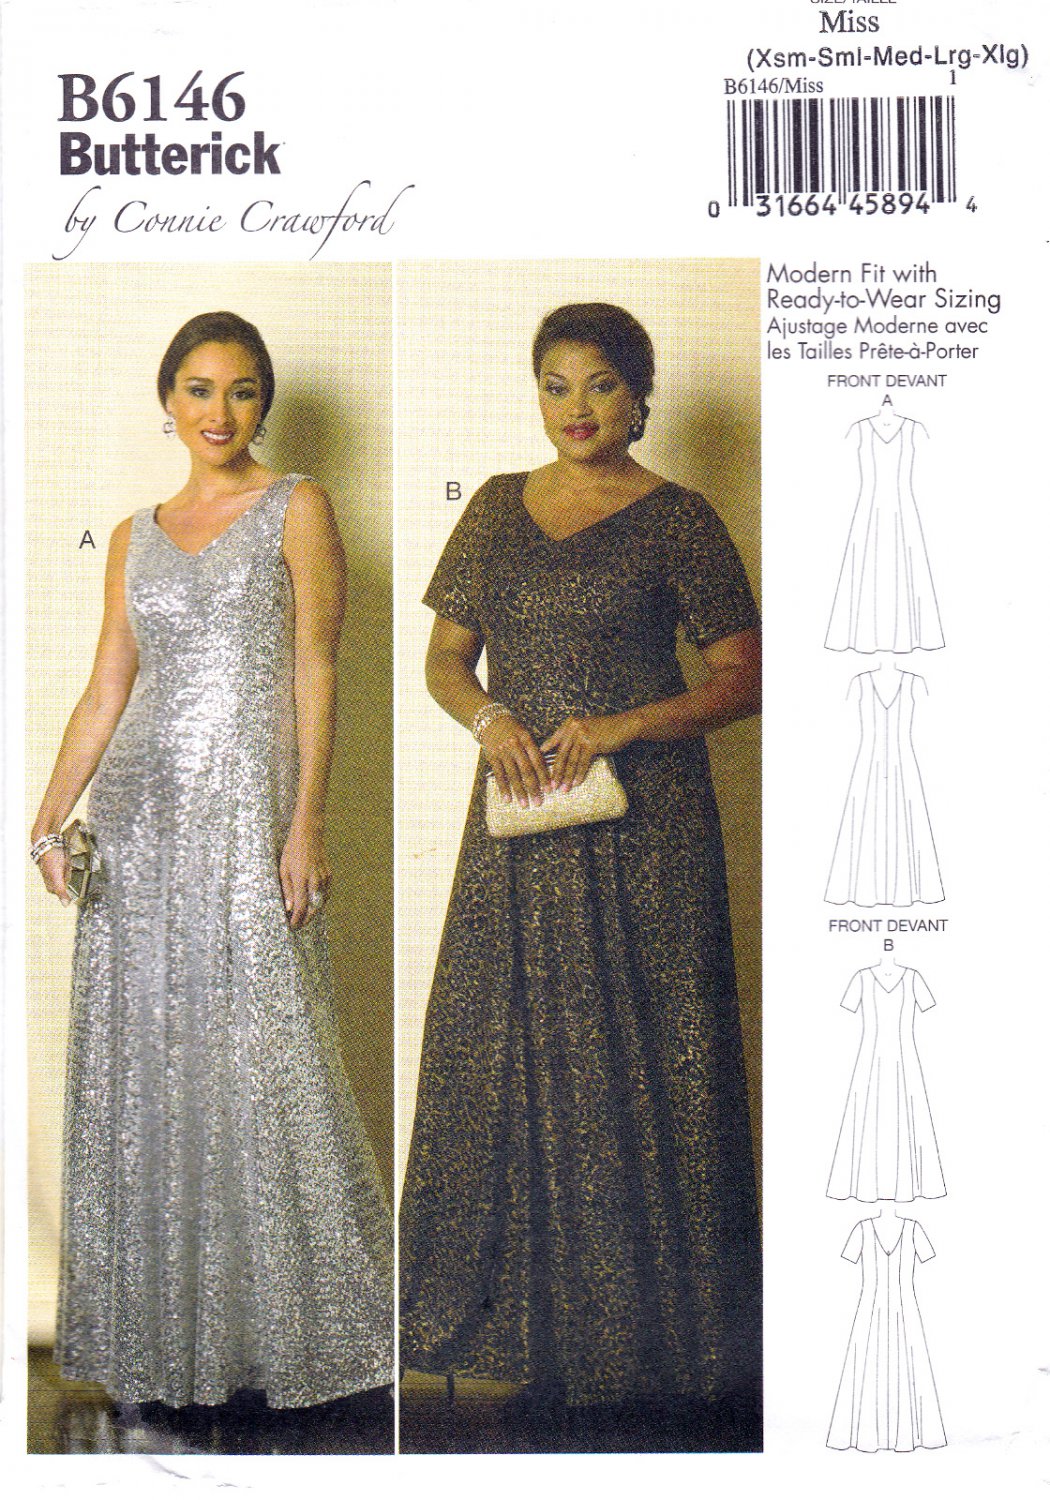 Butterick B6146 6146 Womens Misses Long Formal Dress Sewing Pattern Sizes Xsm-Sml-Med-Lrg-Xlg